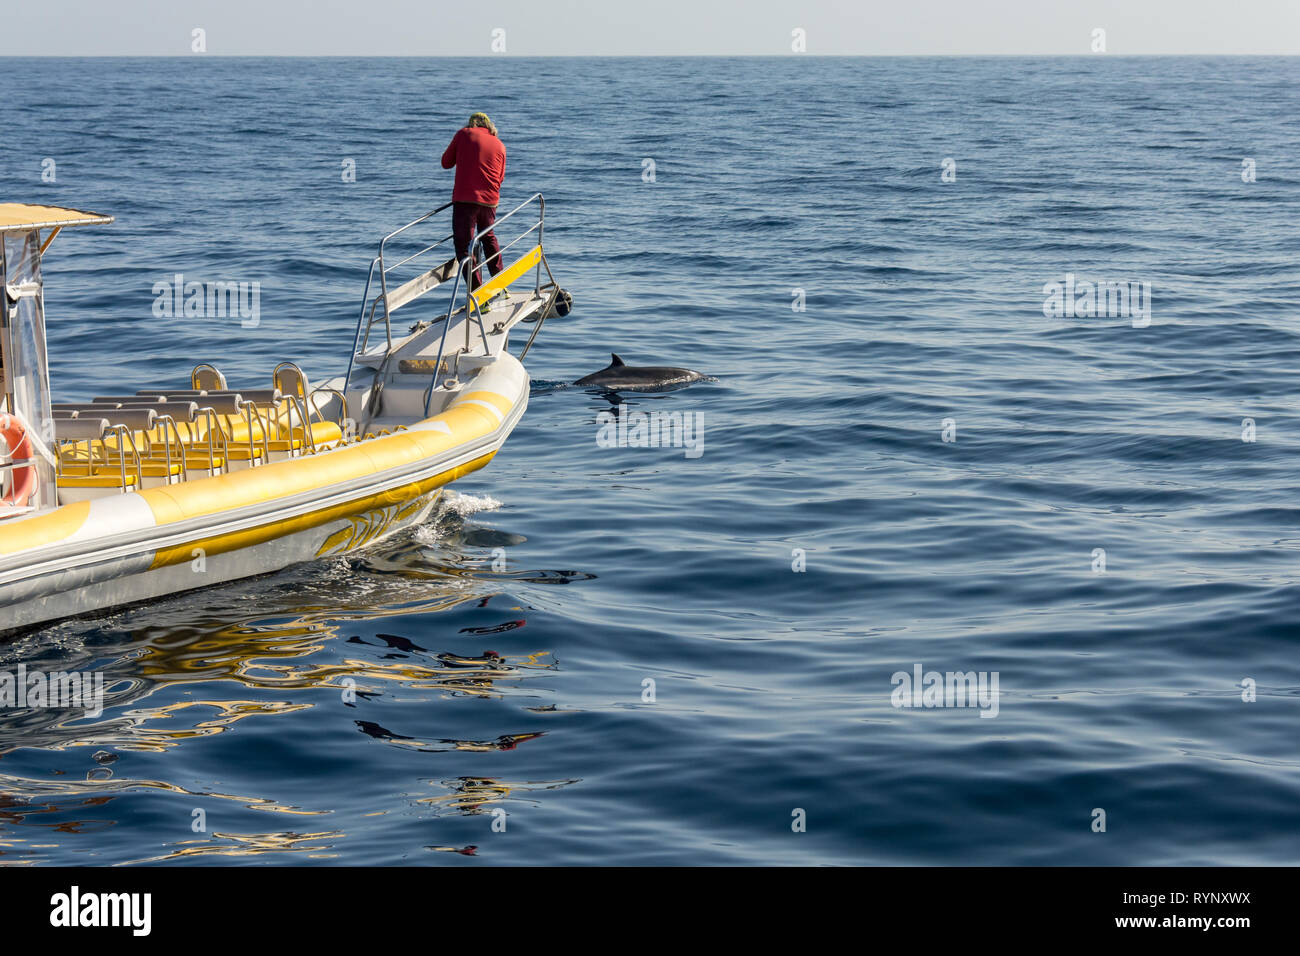 Marine biologist doing research and photographing whales. Stock Photo